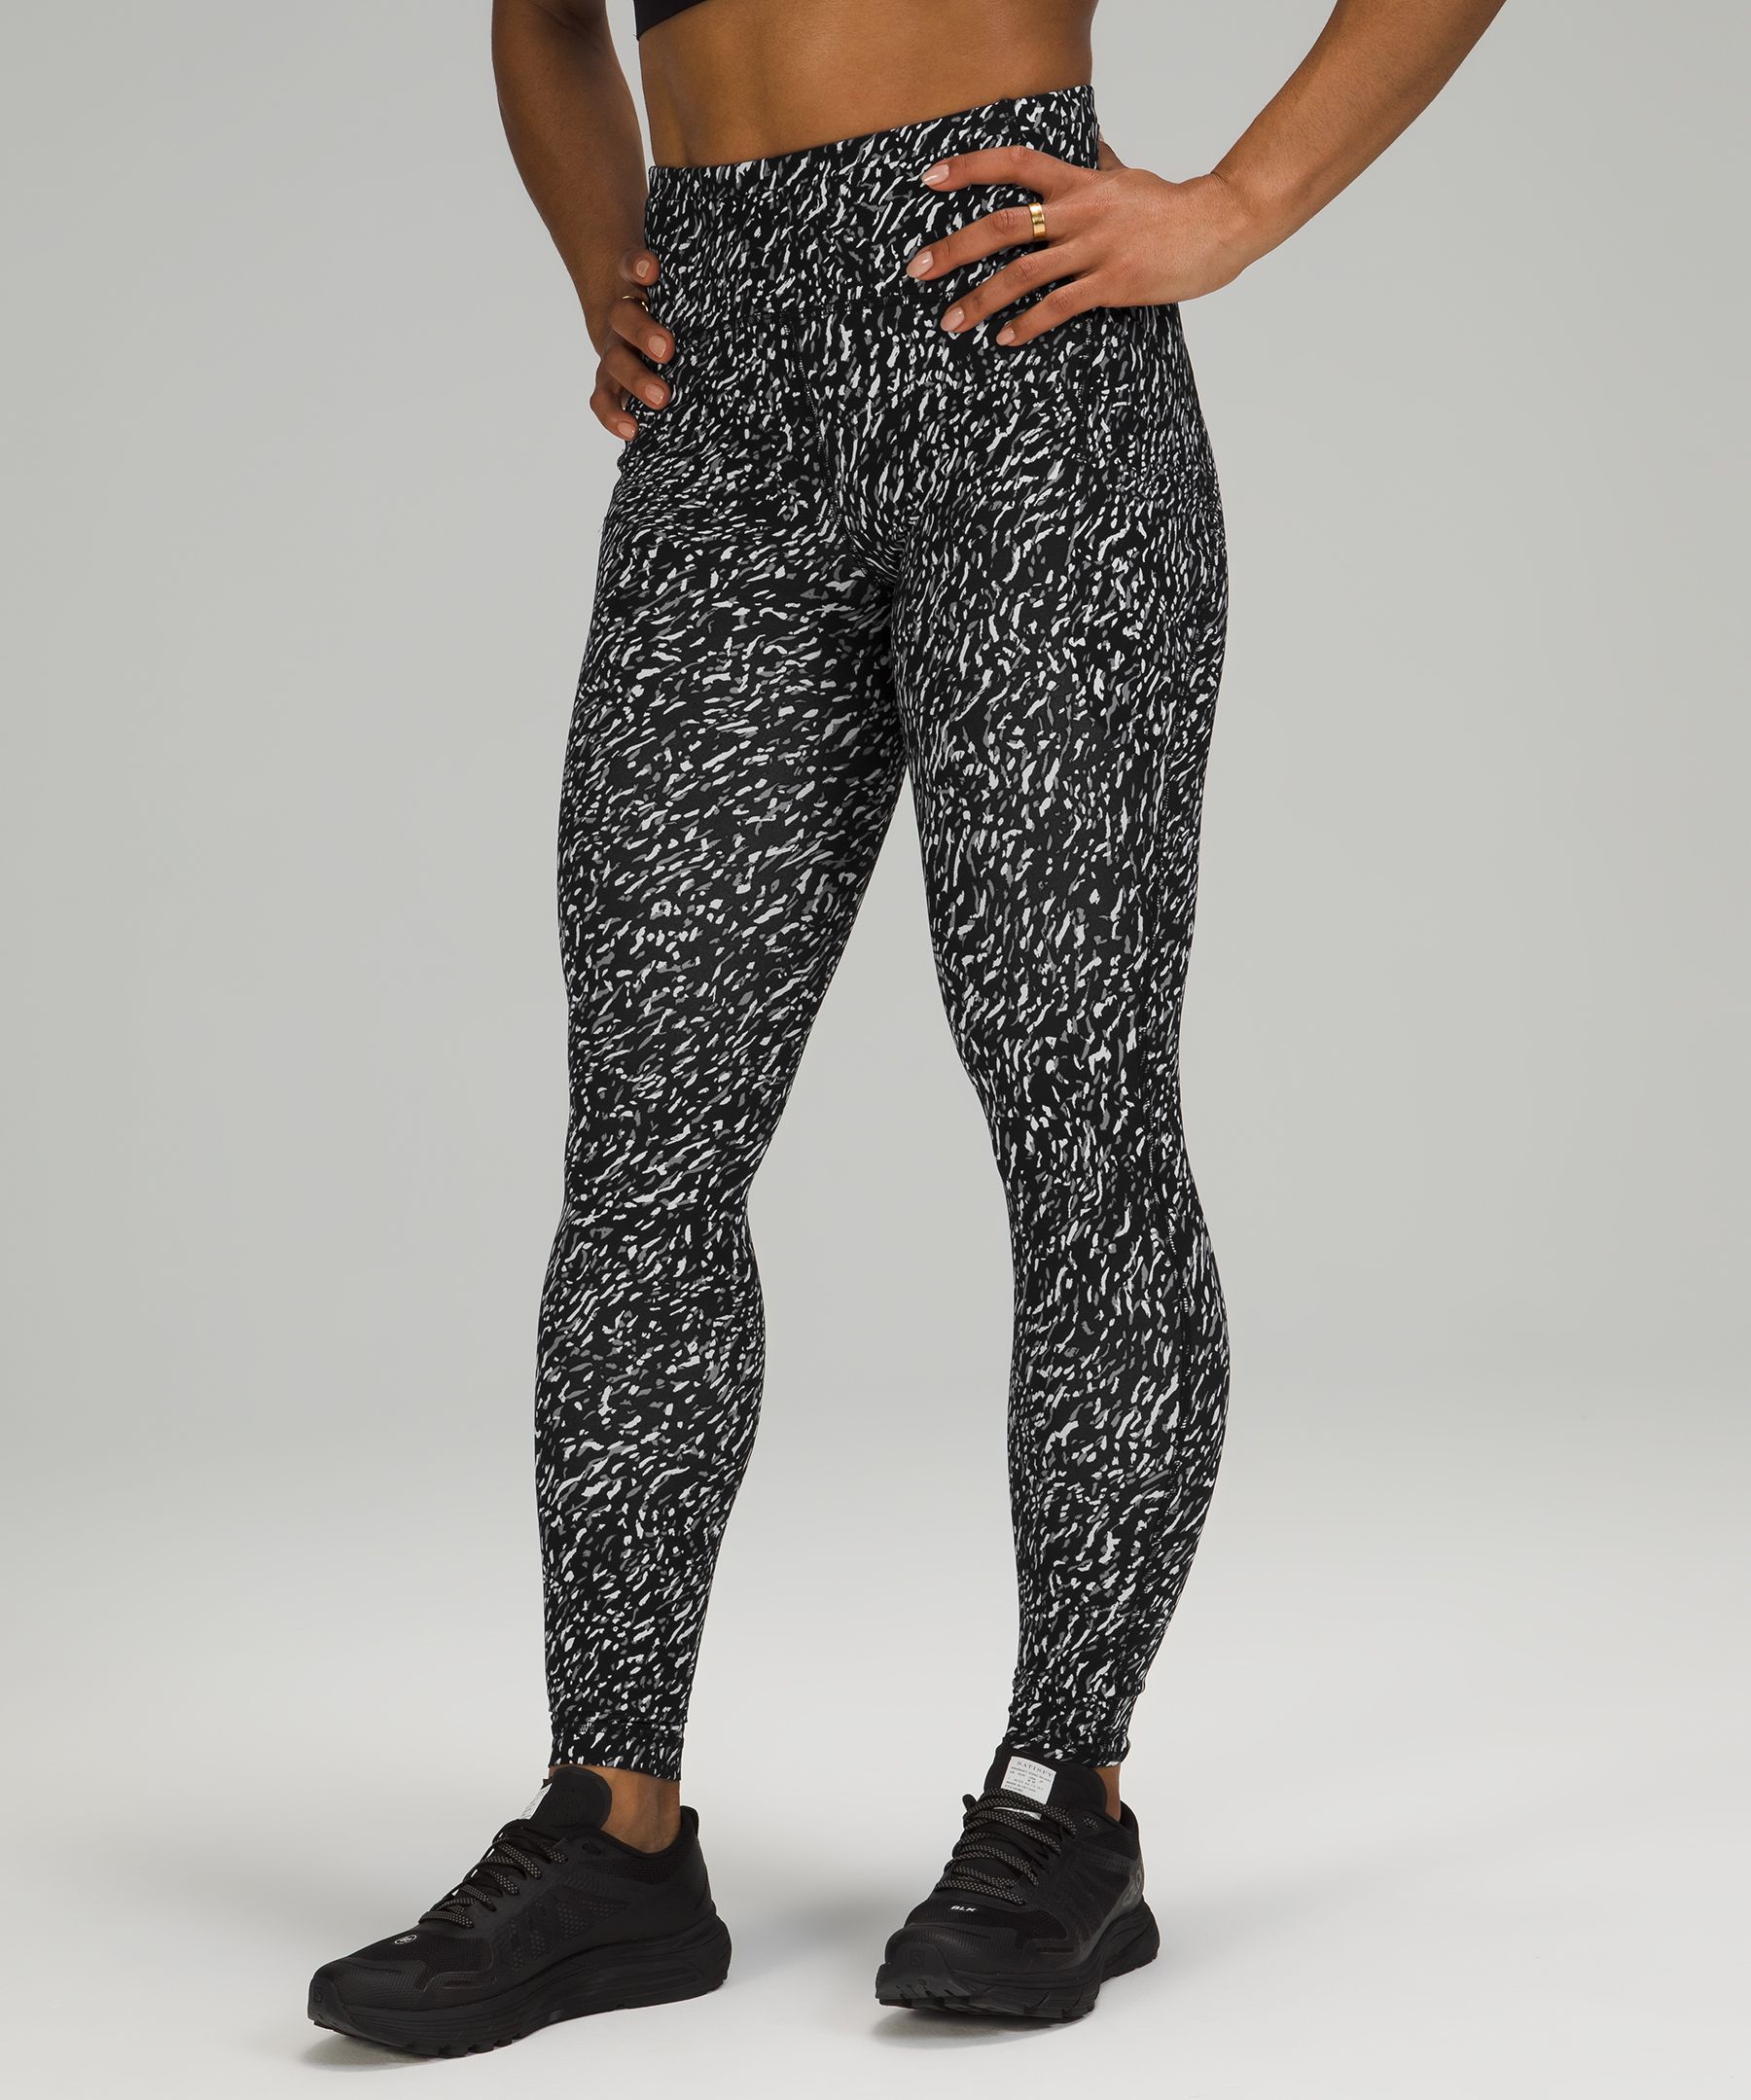 Lululemon Swift Speed High-rise Tights 28" In Speckle Trail Black